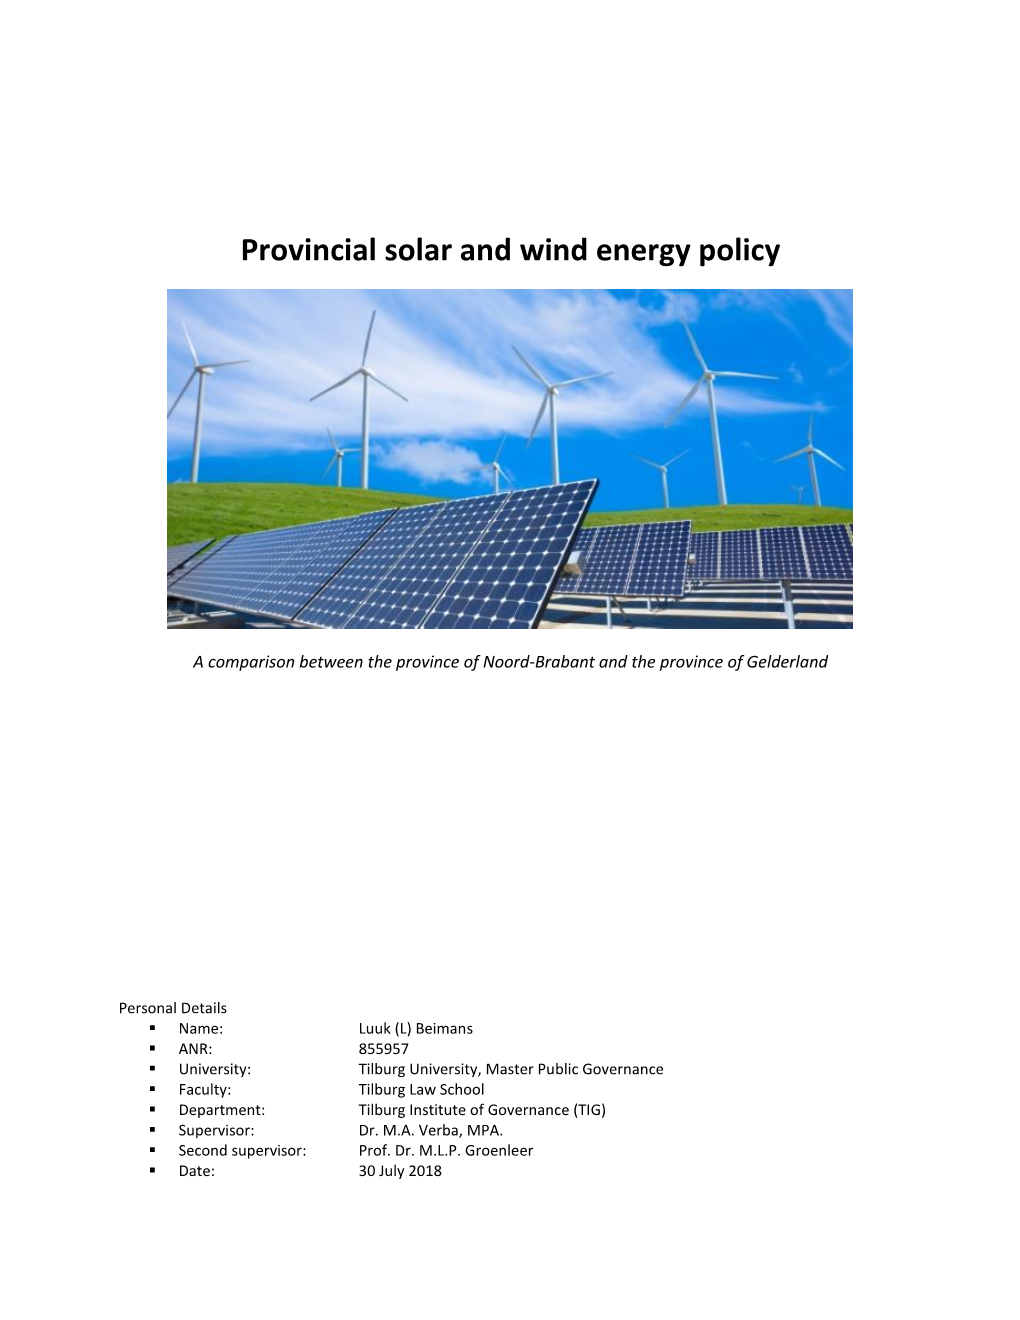 Provincial Solar and Wind Energy Policy